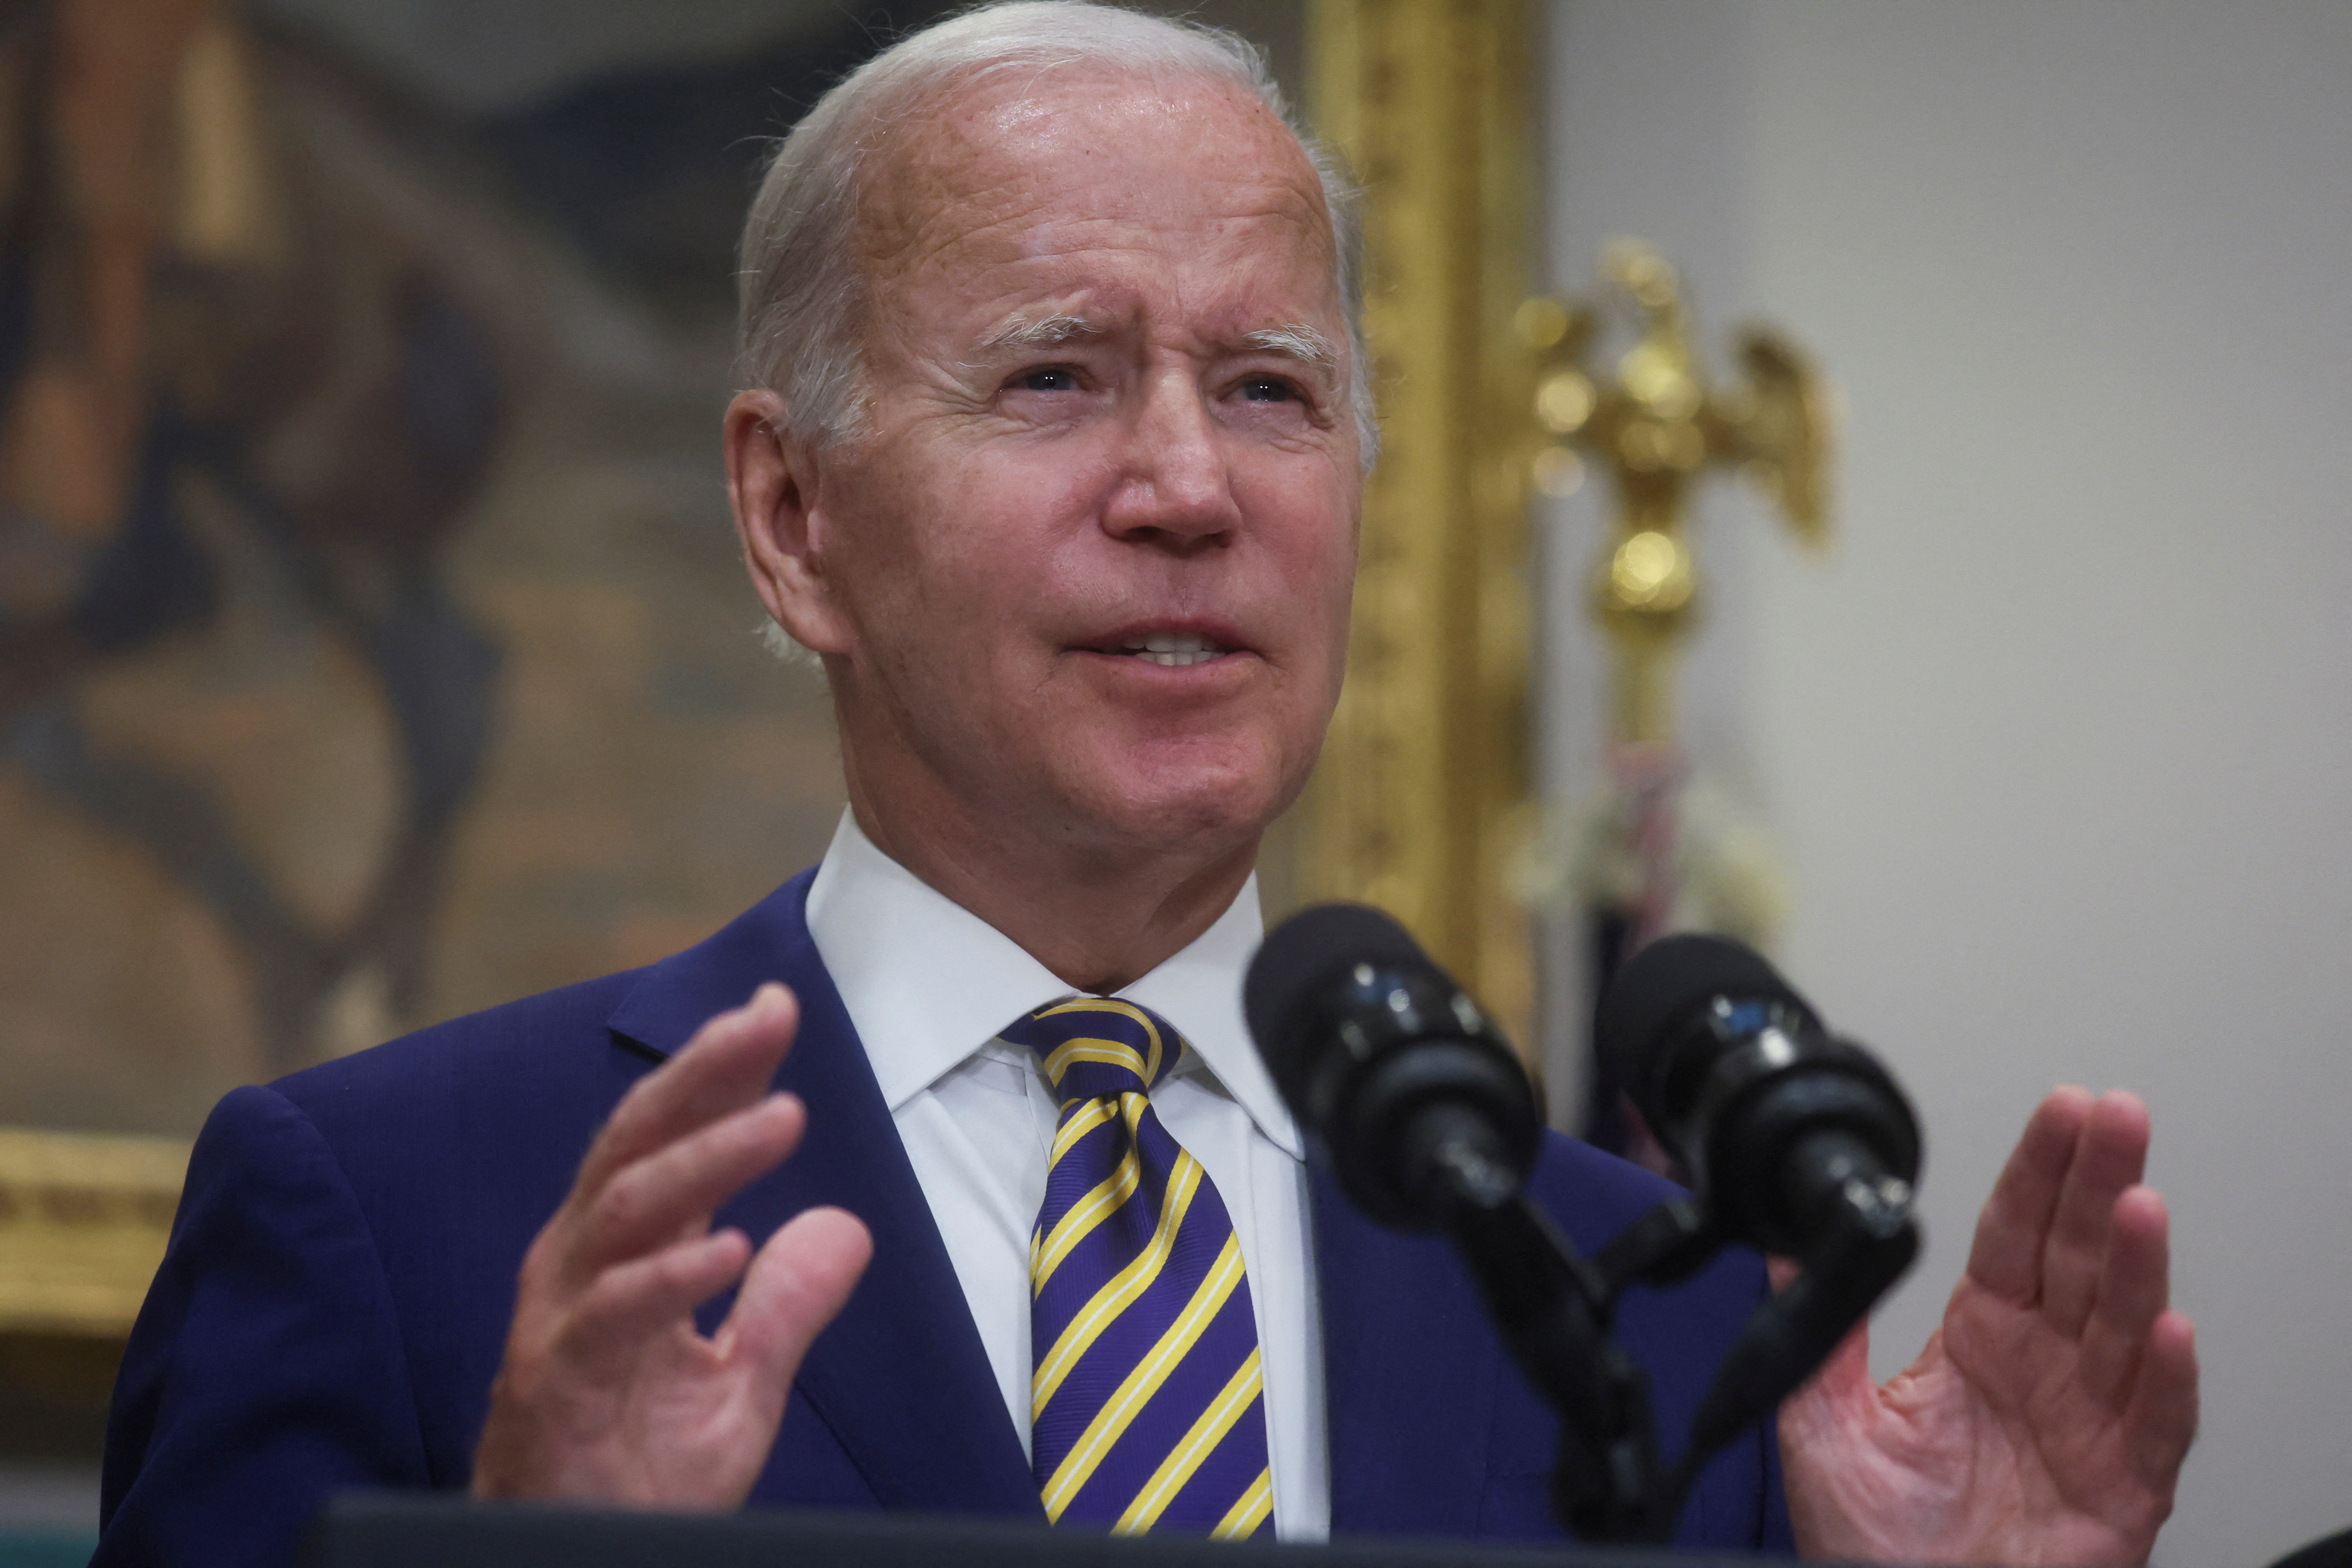 President Biden to Hold First Political Rally in run-up to November elections